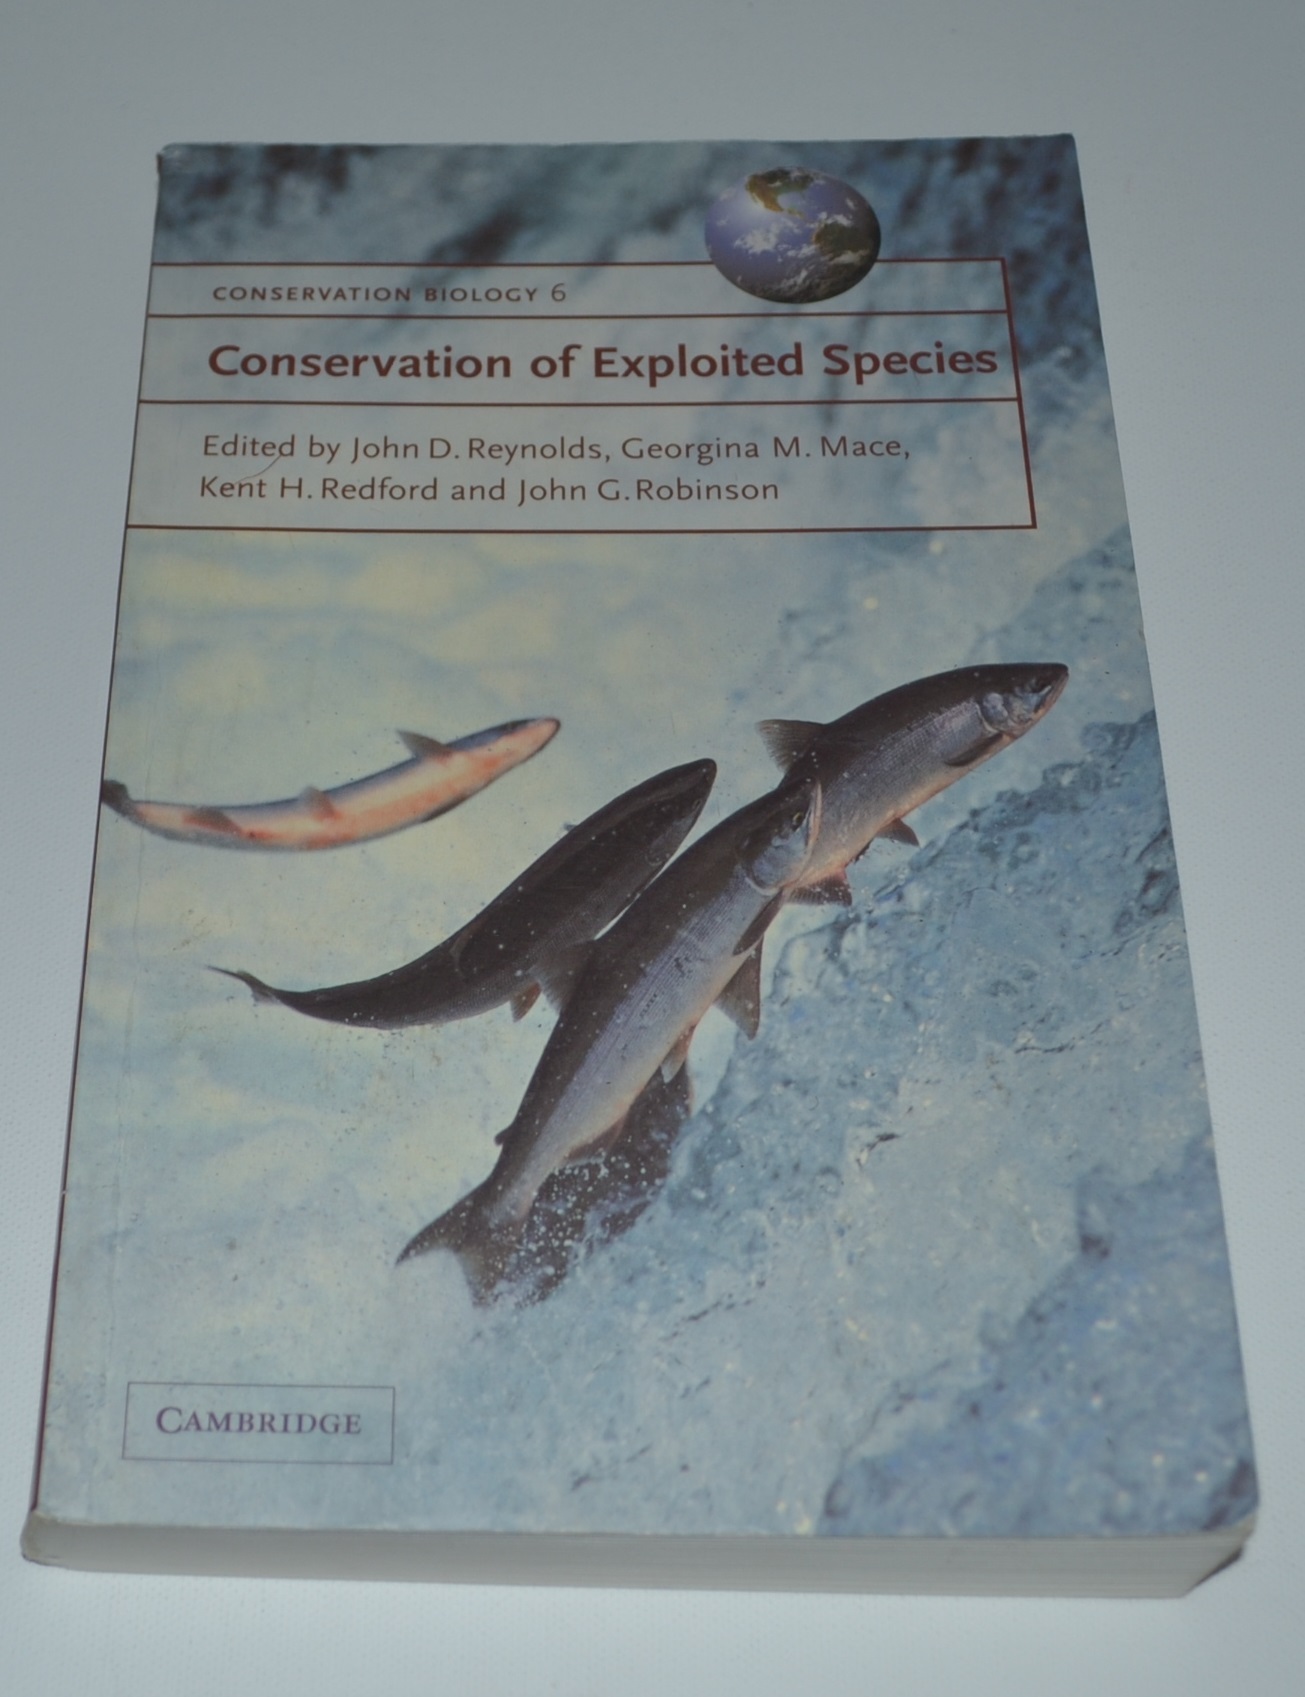 Conservation of Exploited Species (Conservation Biology, Series Number 6) - Edited by John D. Reynolds, Georgina M. Mace, Kent H. Redford, and John G. Robinson